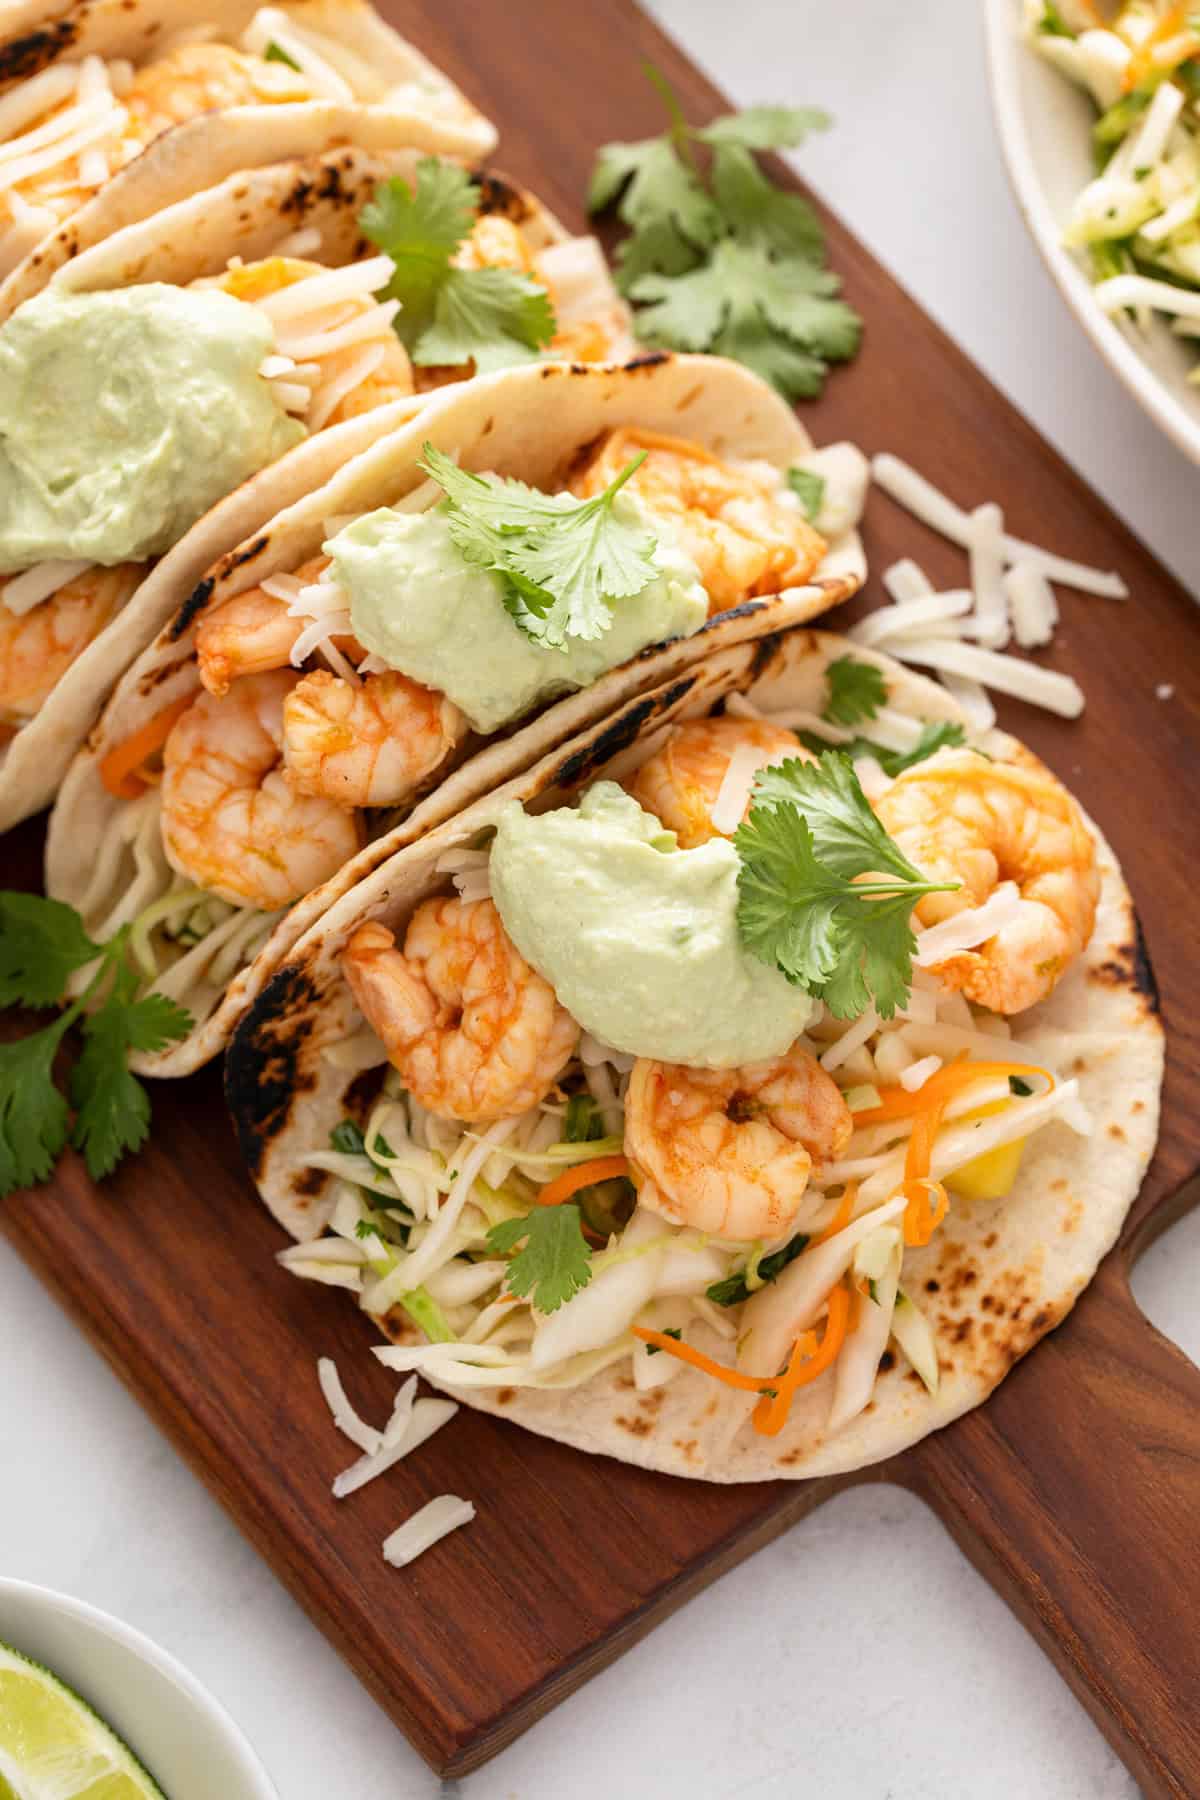 Shrimp tacos assembled and topped with avocado crema on a wooden board.